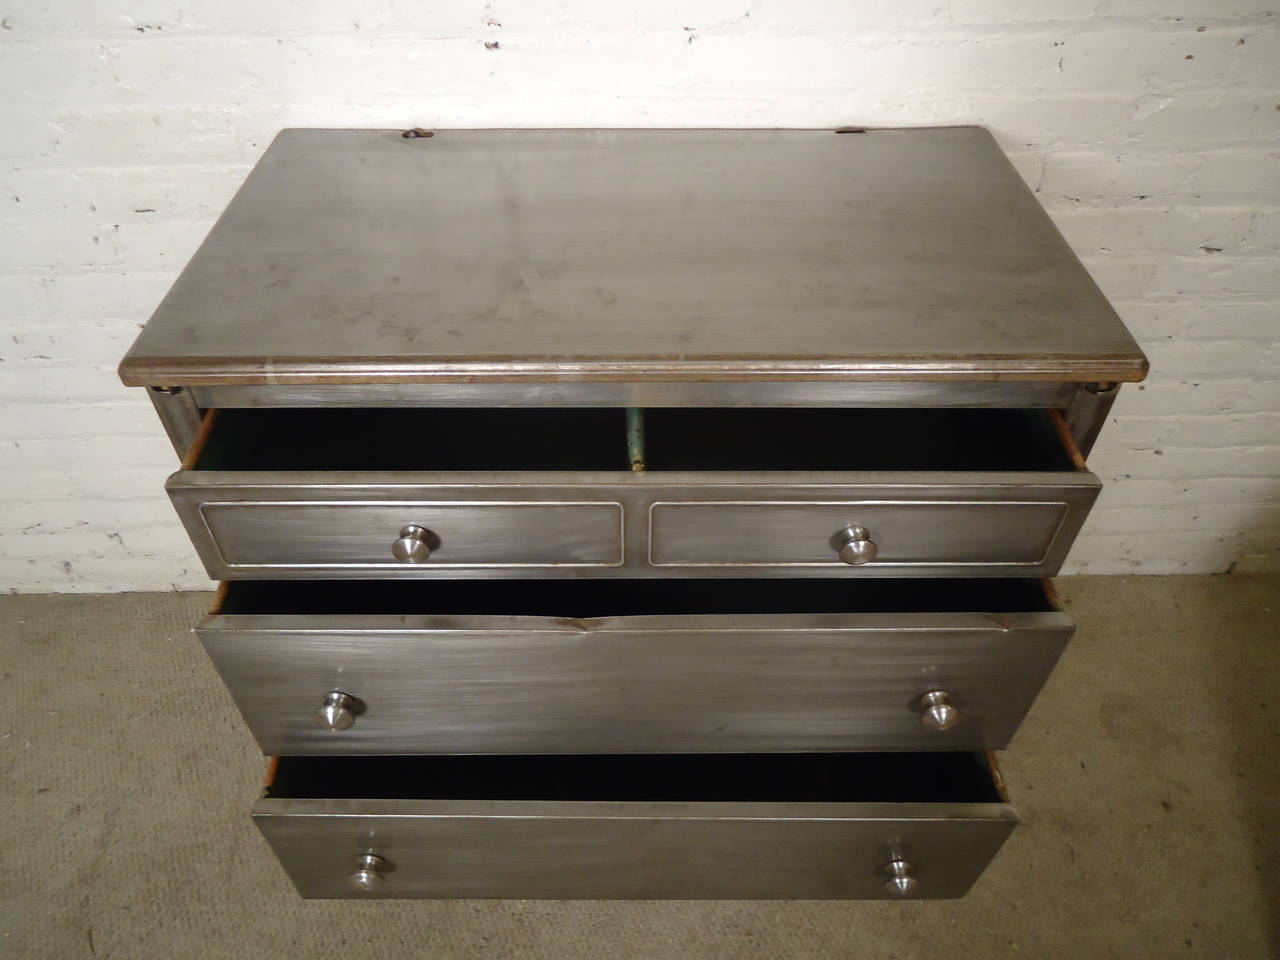 Industrial style finish, newly restored metal dresser on casters. Vintage chest of drawers given new life with a bare metal style finish. Now ready for your modern bedroom. 
Four drawer matching highboy available.

(Please confirm item location -